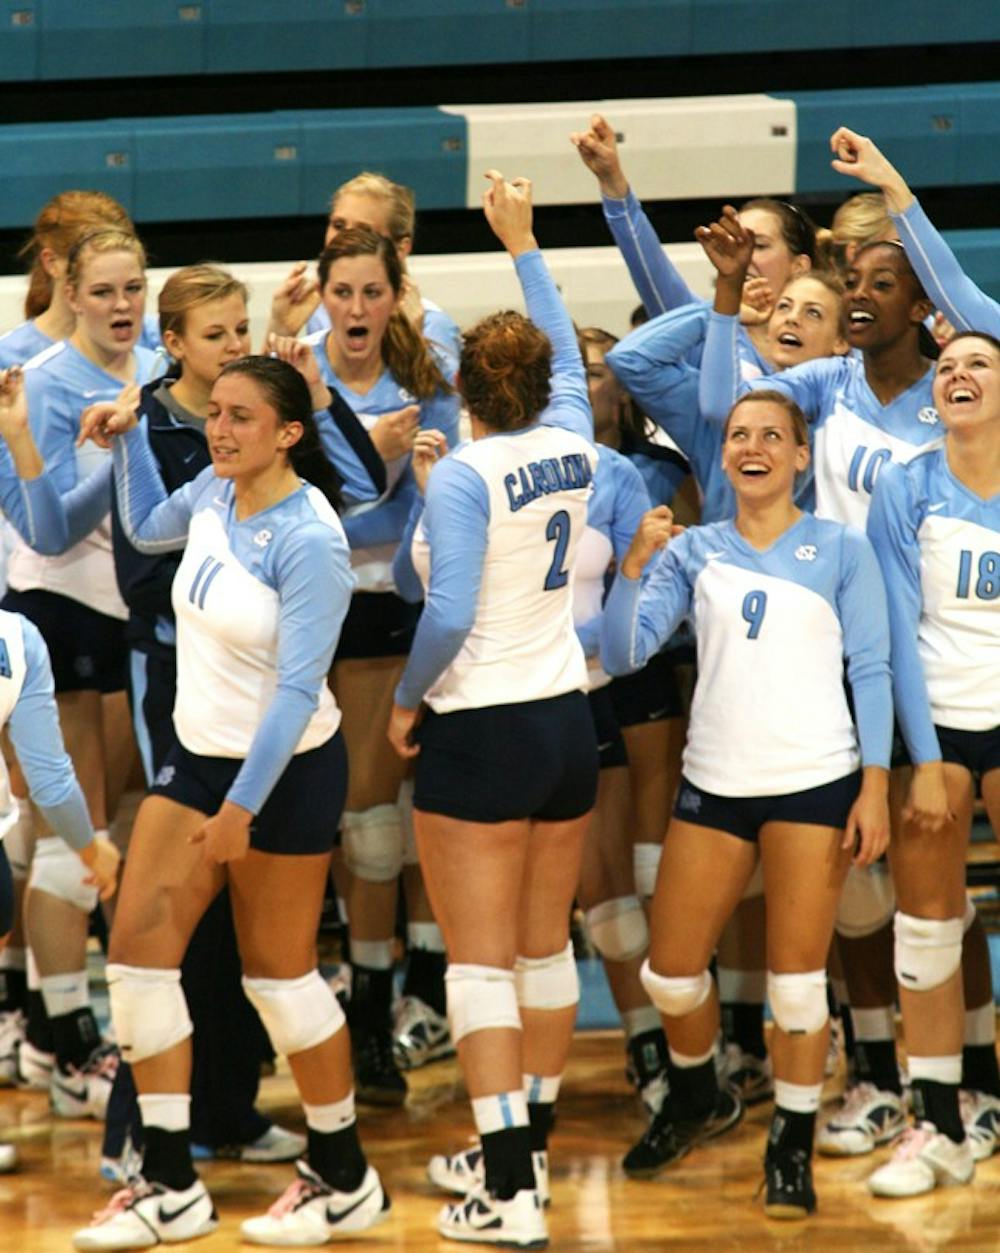 UNC volleyball players meet in their pregame routine before matches. The women use celebrations as way to increase energy during the games.